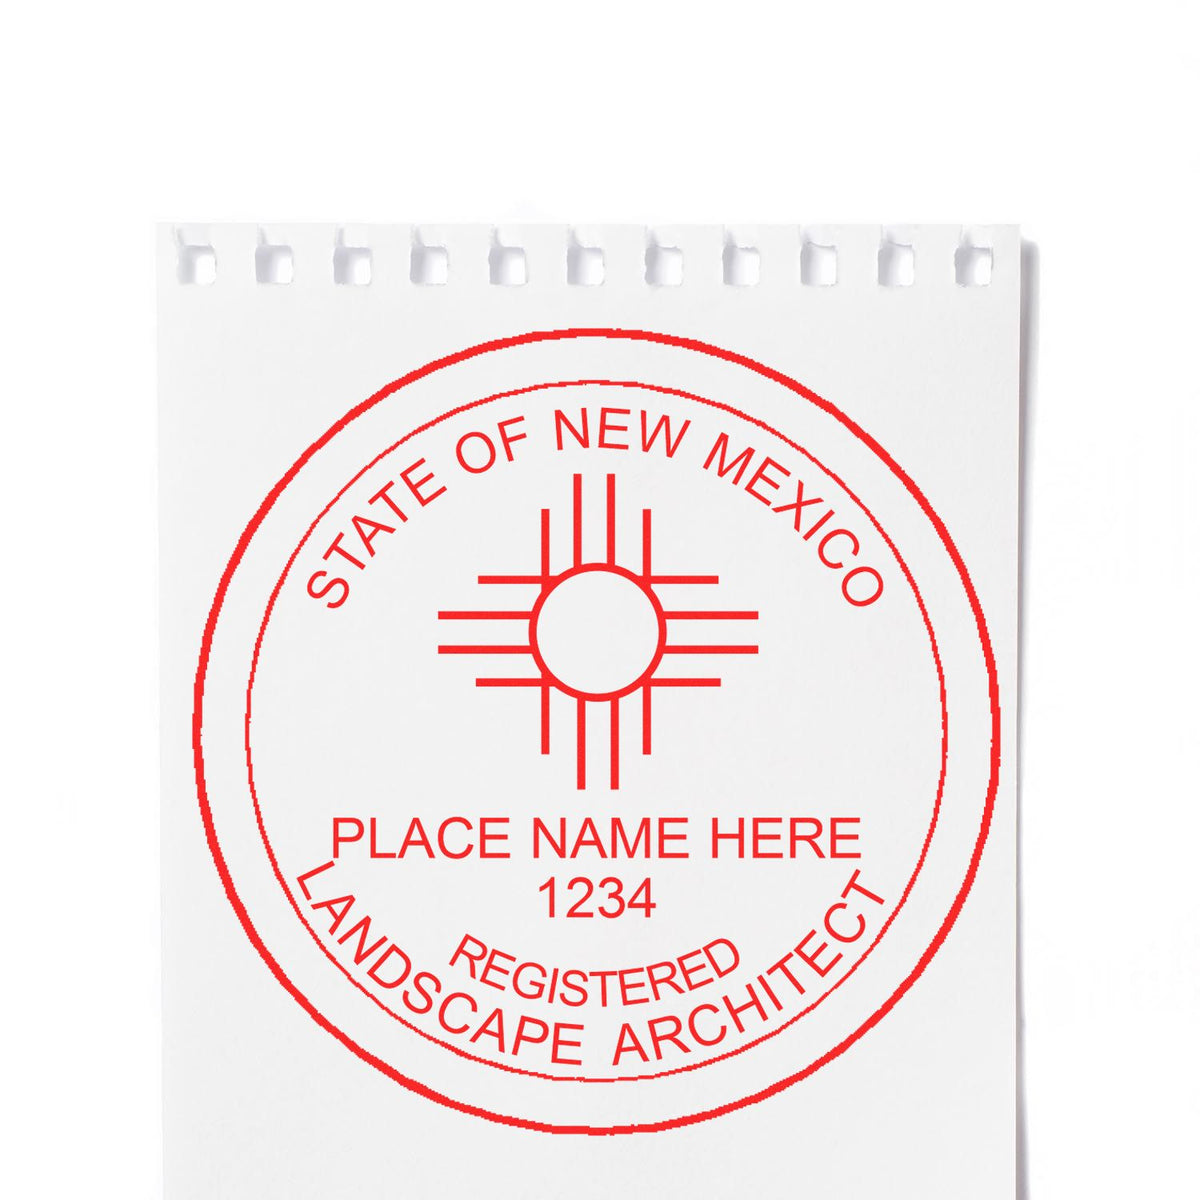 The New Mexico Landscape Architectural Seal Stamp stamp impression comes to life with a crisp, detailed photo on paper - showcasing true professional quality.